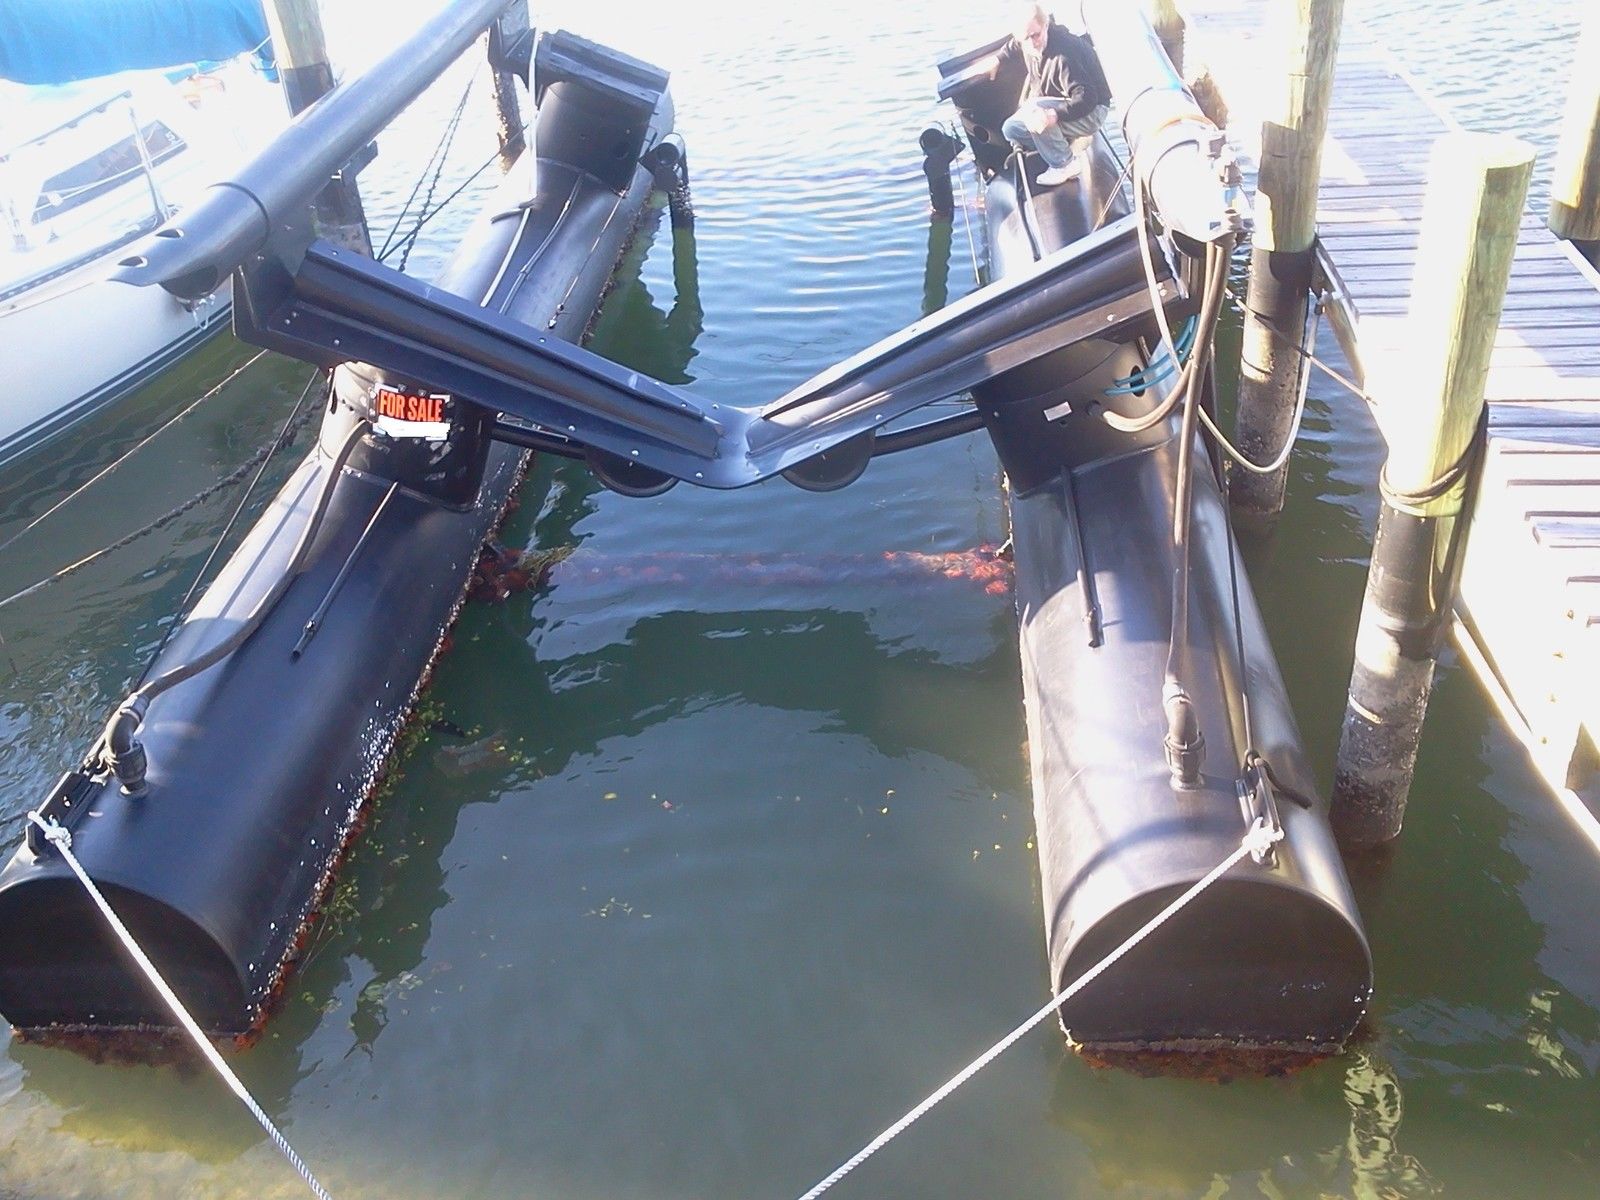 Air Berth Floating Boat Lift 2006 for sale for $15,000 